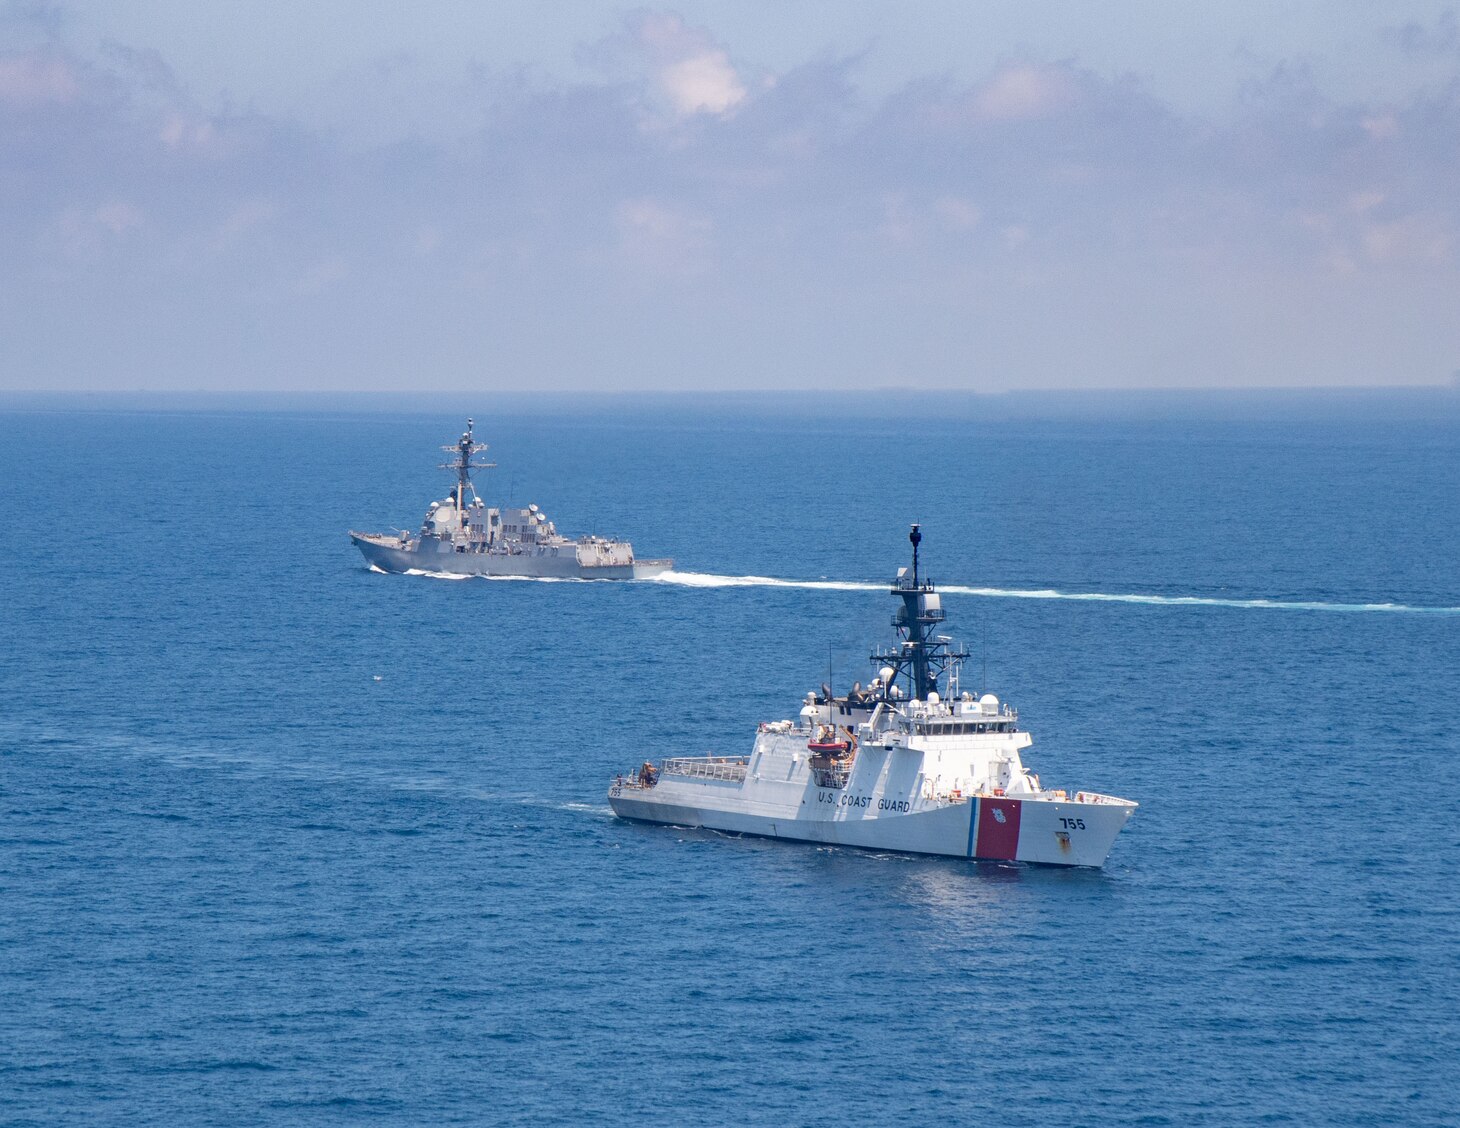 TAIWAN STRAIT (Aug. 27, 2021) Legend-class U.S. Coast Guard National Security Cutter Munro (WMSL 755) transits the Taiwan Strait during a routine transit with Arleigh-burke class guided-missile destroyer USS Kidd (DDG 100), Aug. 27. Kidd is deployed supporting Commander, Task Force (CTF) 71/Destroyer Squadron (DESRON) 15, the Navy’s largest forward-deployed DESRON and U.S. 7th Fleet’s principal surface force.